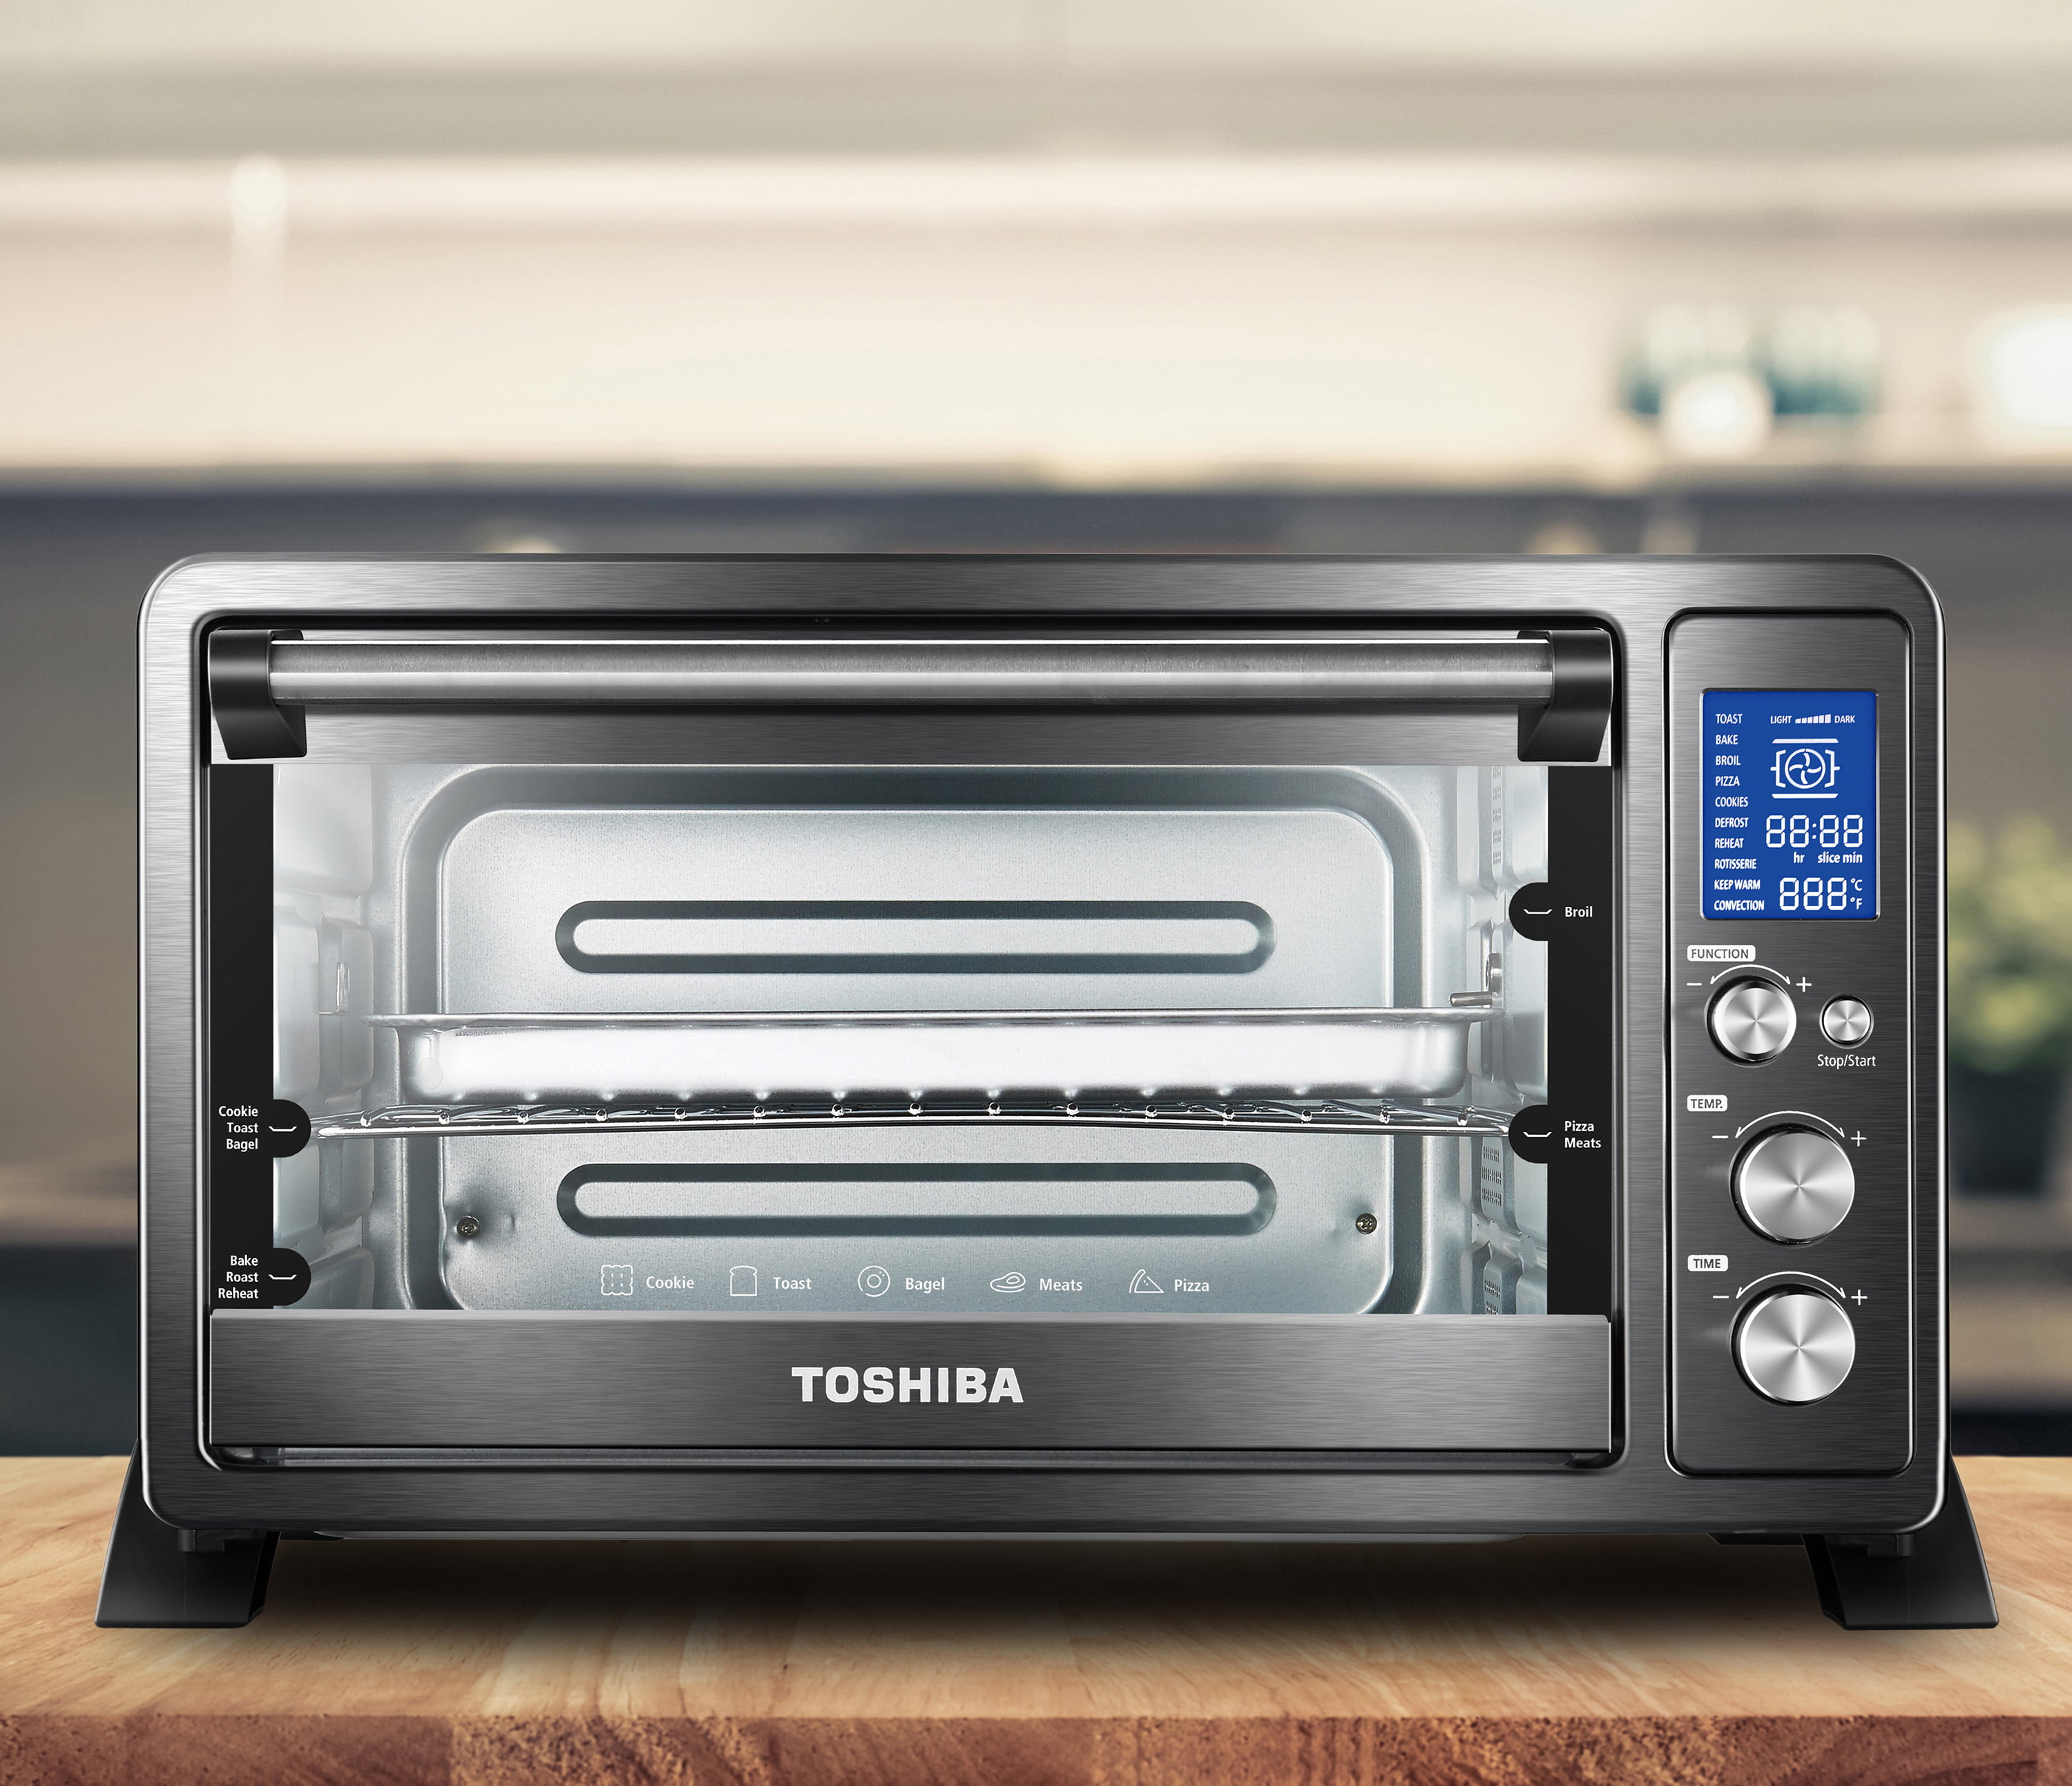 Toshiba MC25CEY-SS Mechanical Oven with Convection/Toast/Bake/Broil  Function, 25 L capacity/6 Slices Bread/12-inch Pizza, Stainless Steel